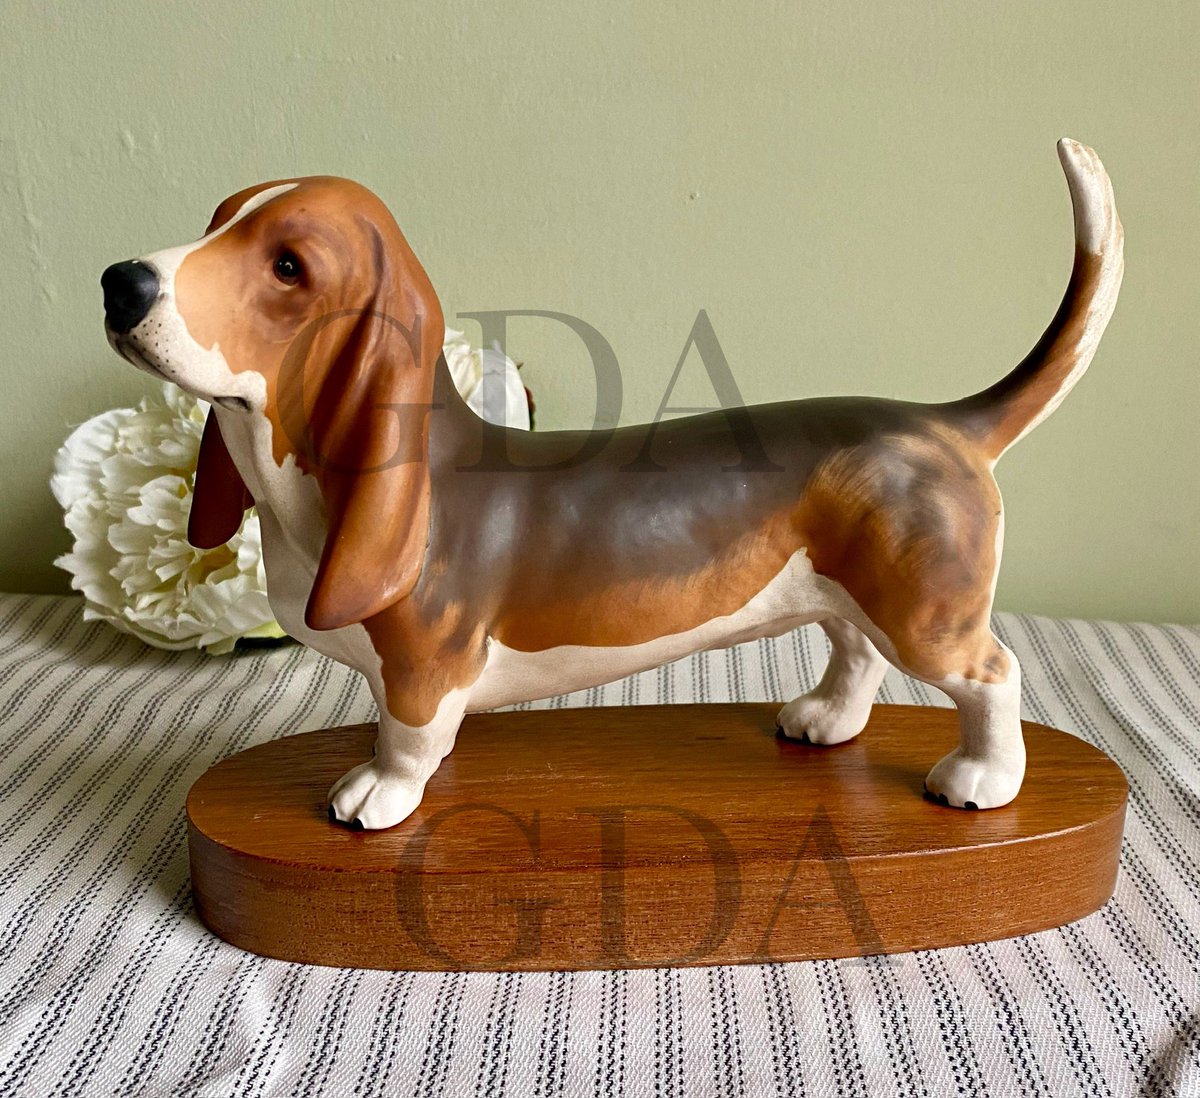 Good morning #earlybiz 🐶🐶🐶 🐶 Meet this handsome Beswick Basset Hound. See him and more at, Dieudonneart.com/antiques #dogs #Beswick #collectables #vintage #elevenseshour #hounds #shopsmalluk #shopindie #gifts